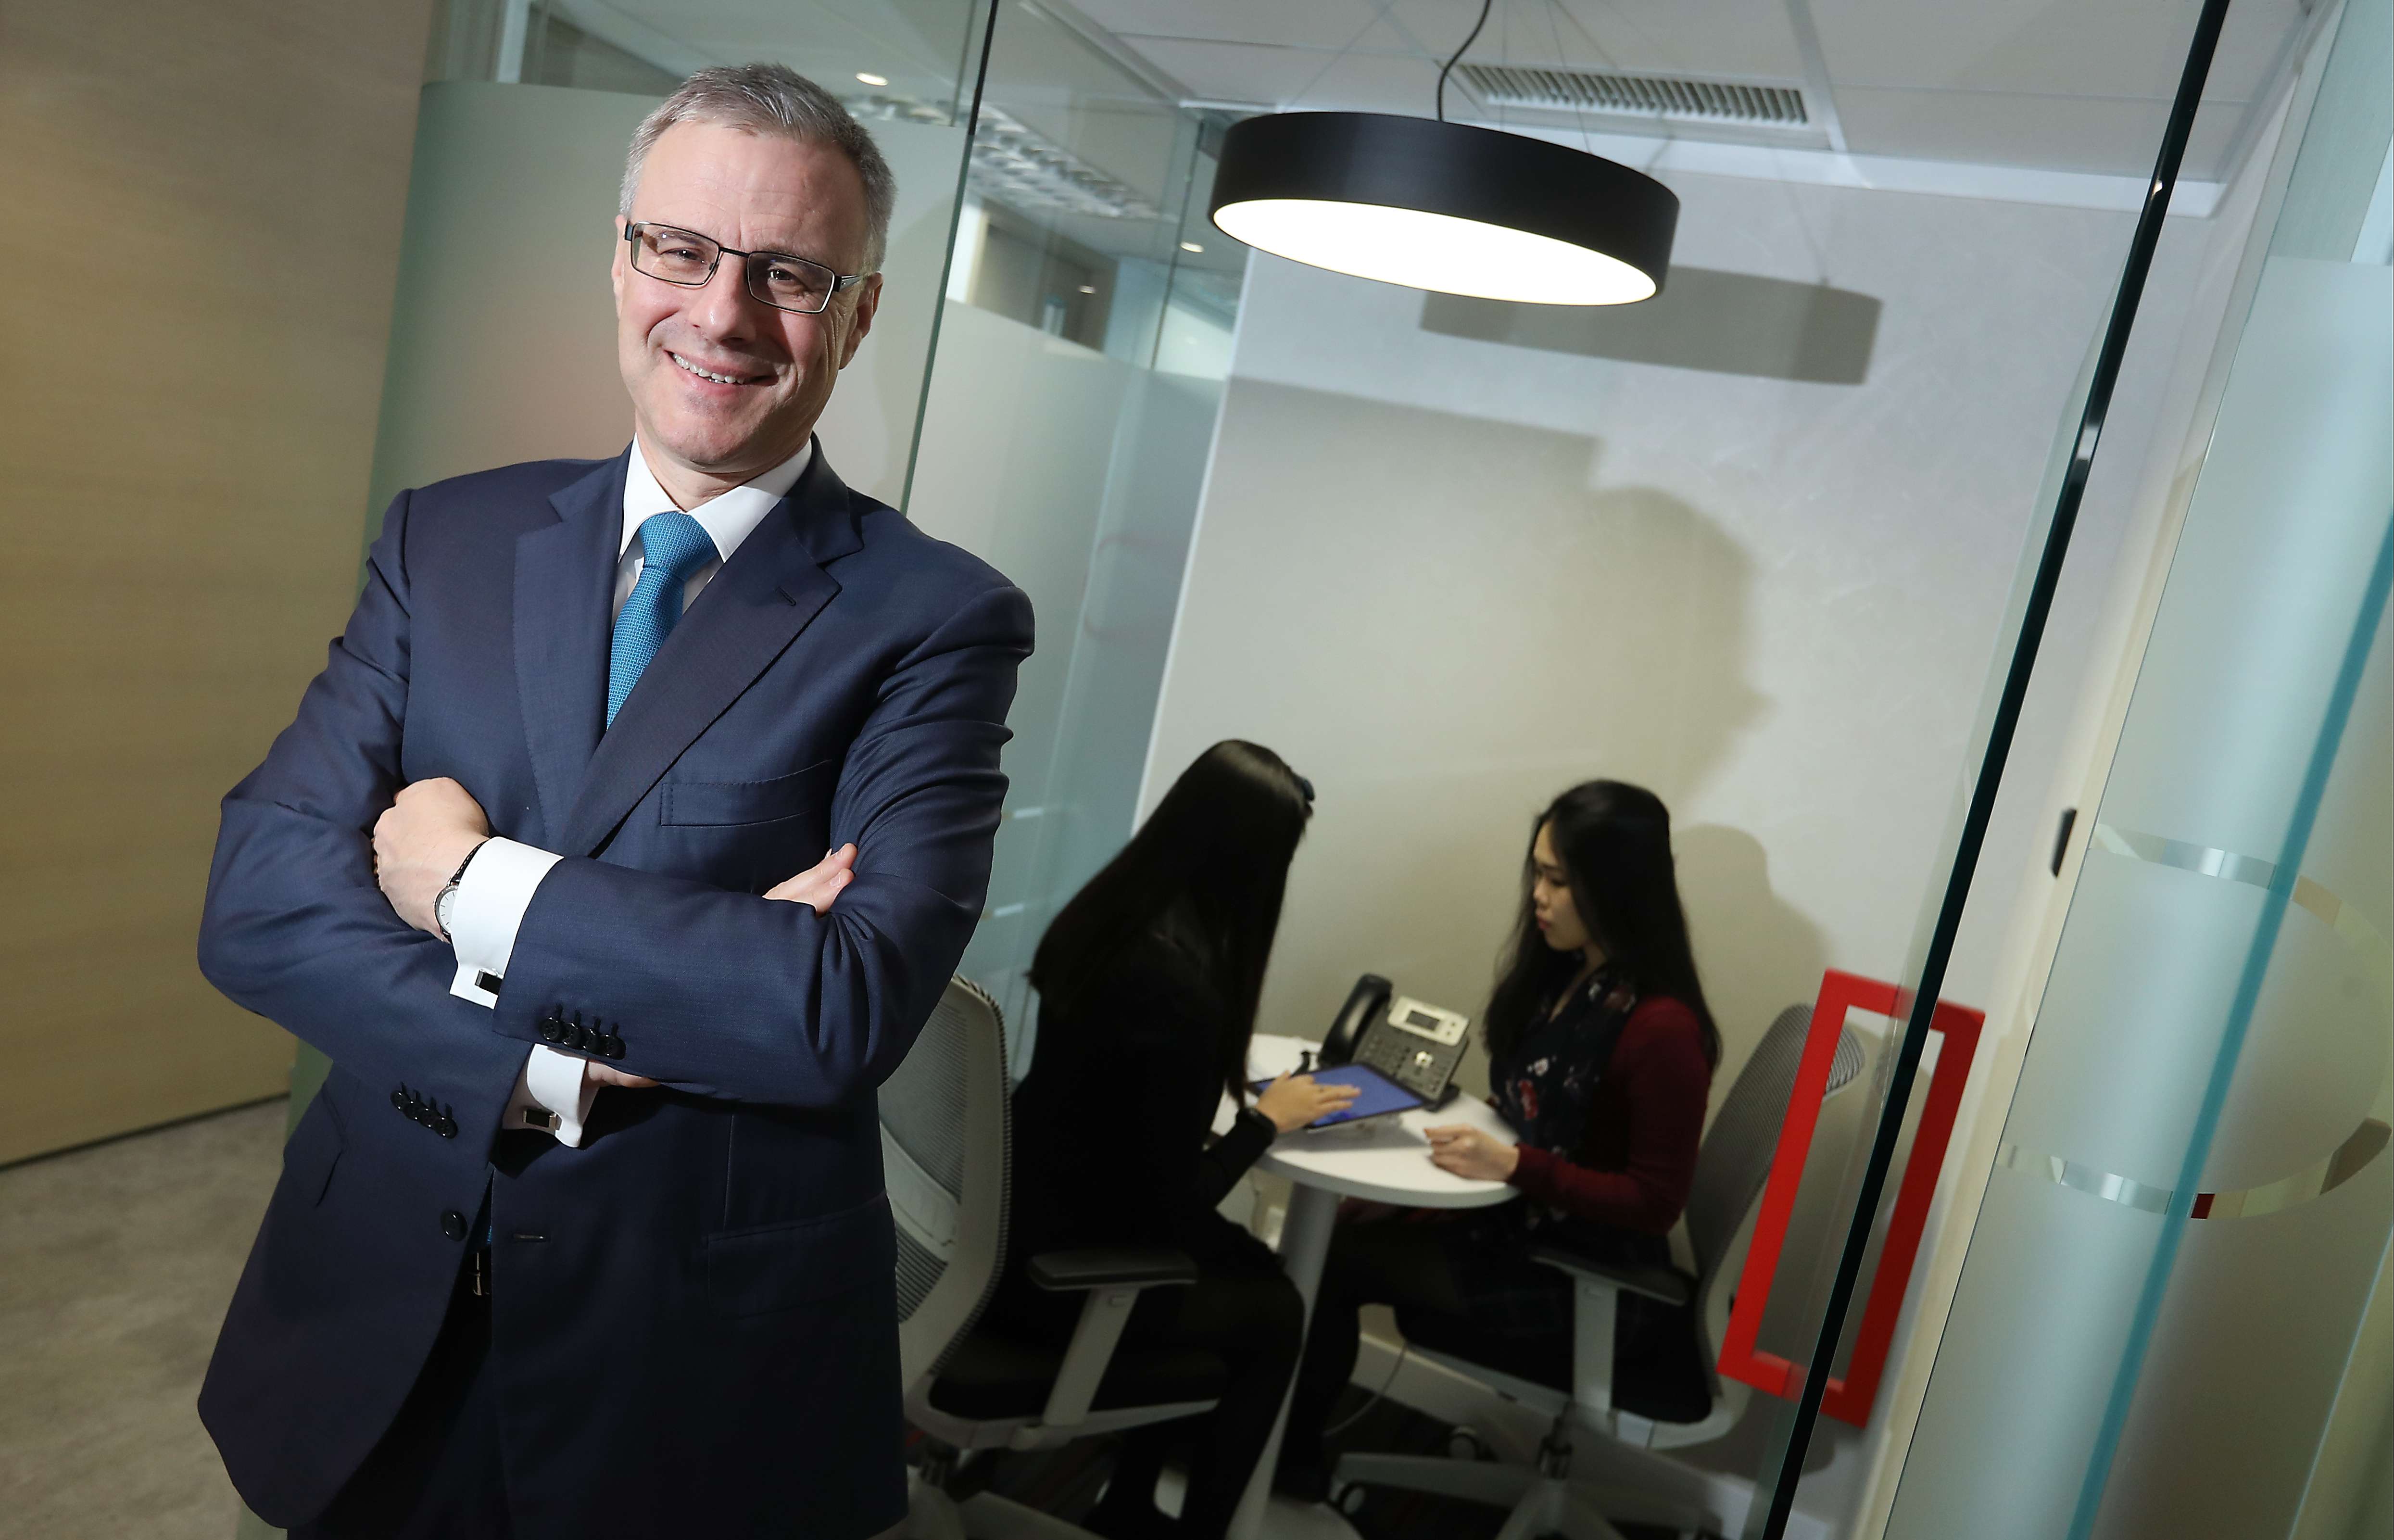 Adecco chief executive Alain Dehaze says companies need to adapt to the needs of millennial workers. Photo: Nora Tam